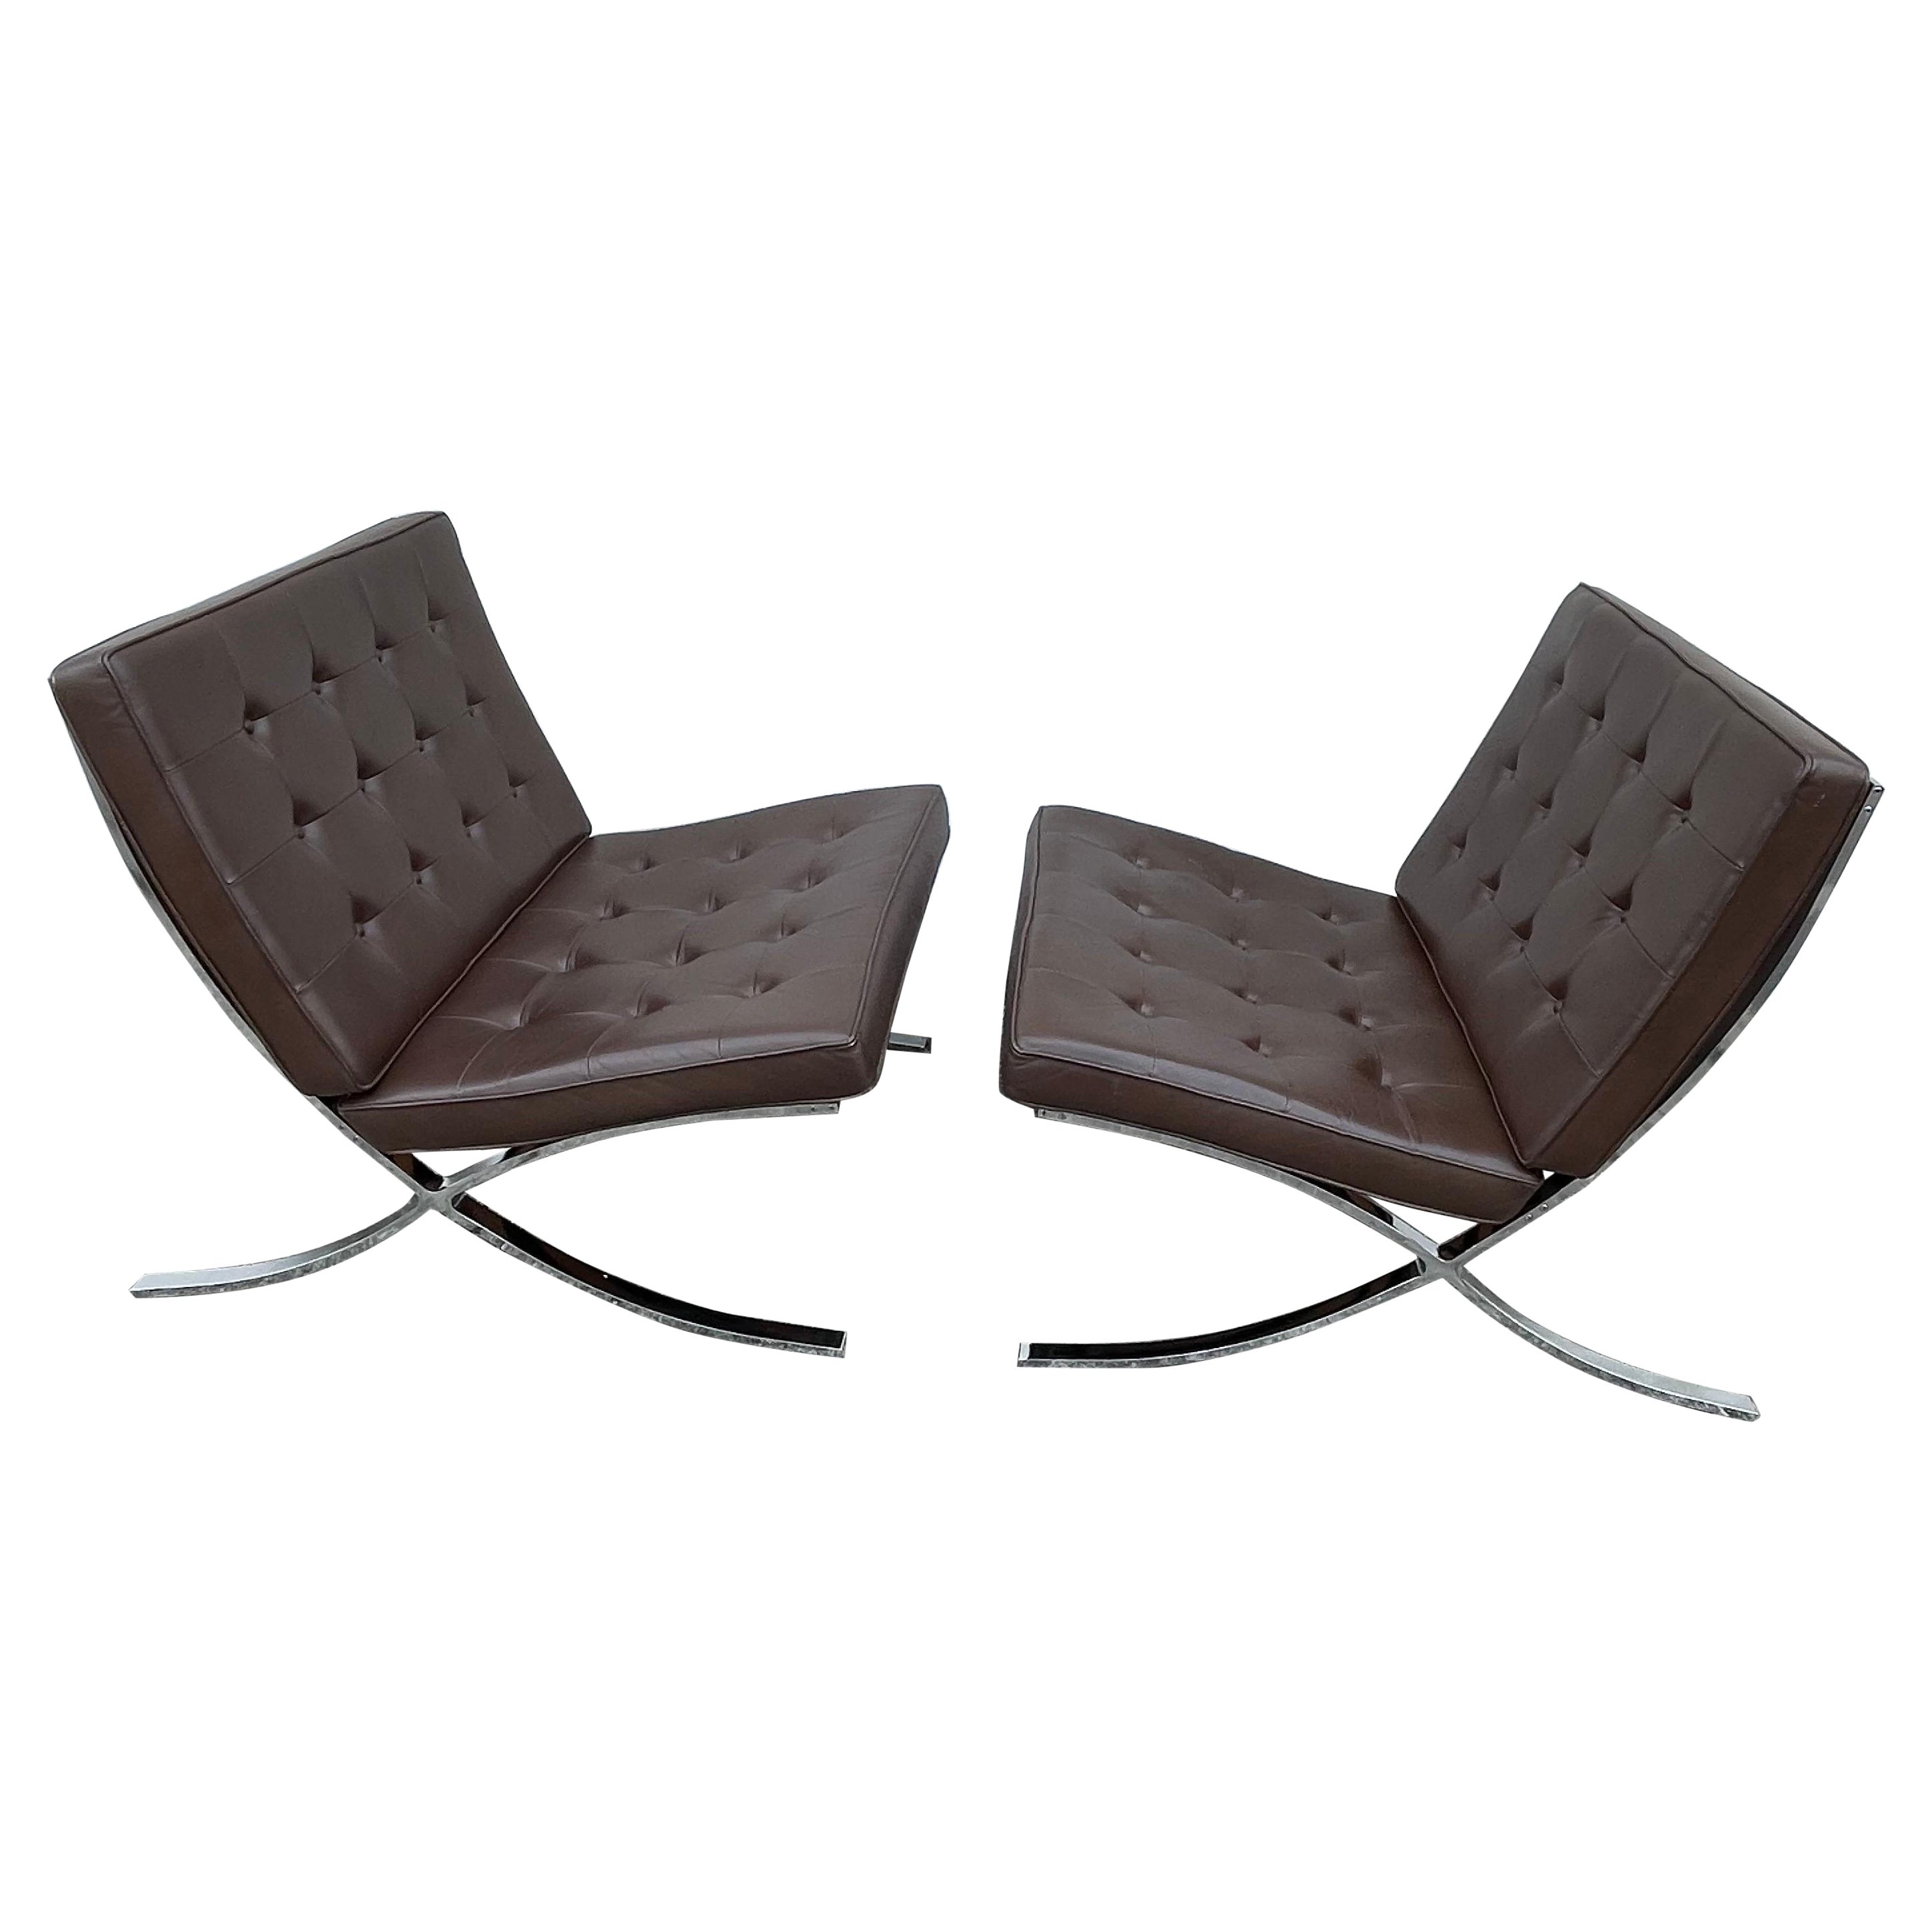 Pair of Mid-Century Modern Barcelona Chairs in Brown Leather, 1970's Generation